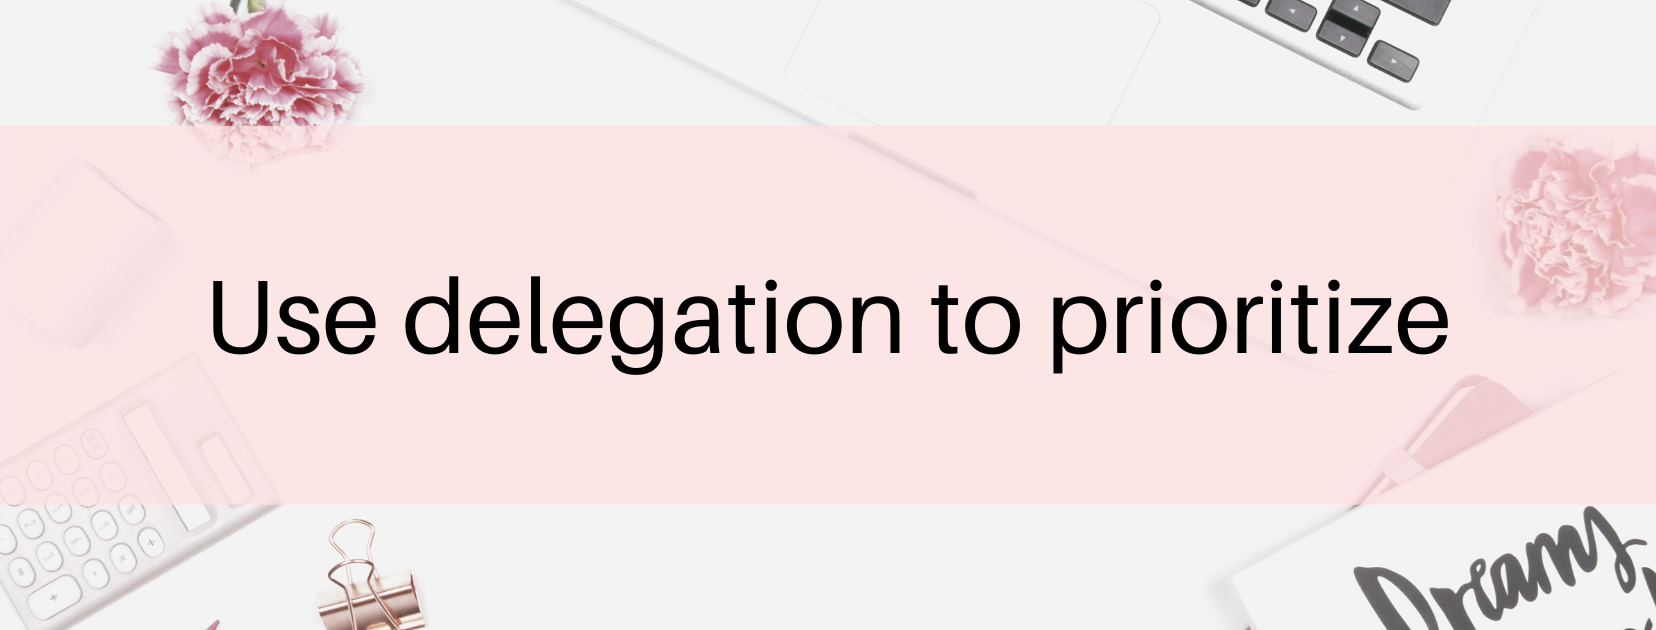 Use delegation to prioritize